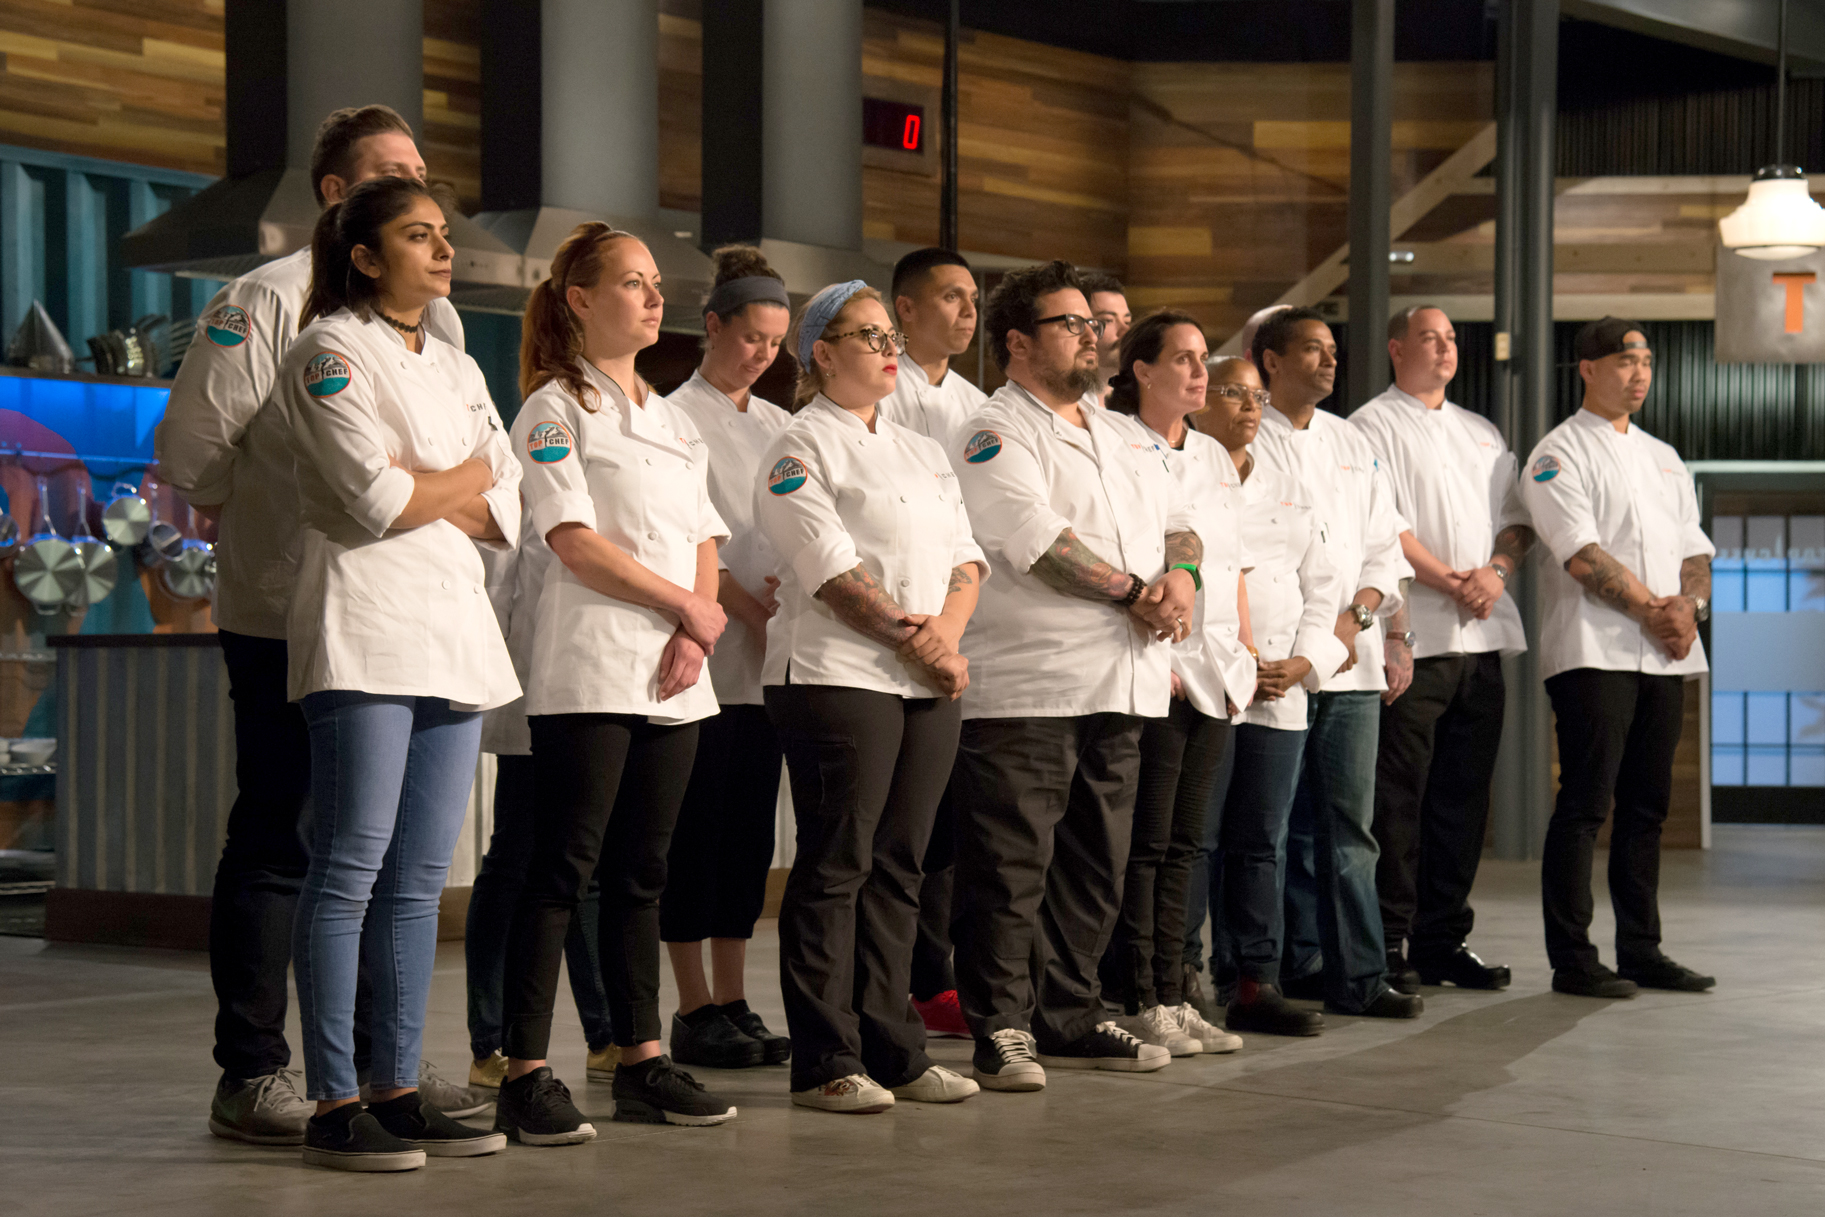 Vote Now for Your Top Chef Fan Favorite in Season 20 and Decide the Winner! 13